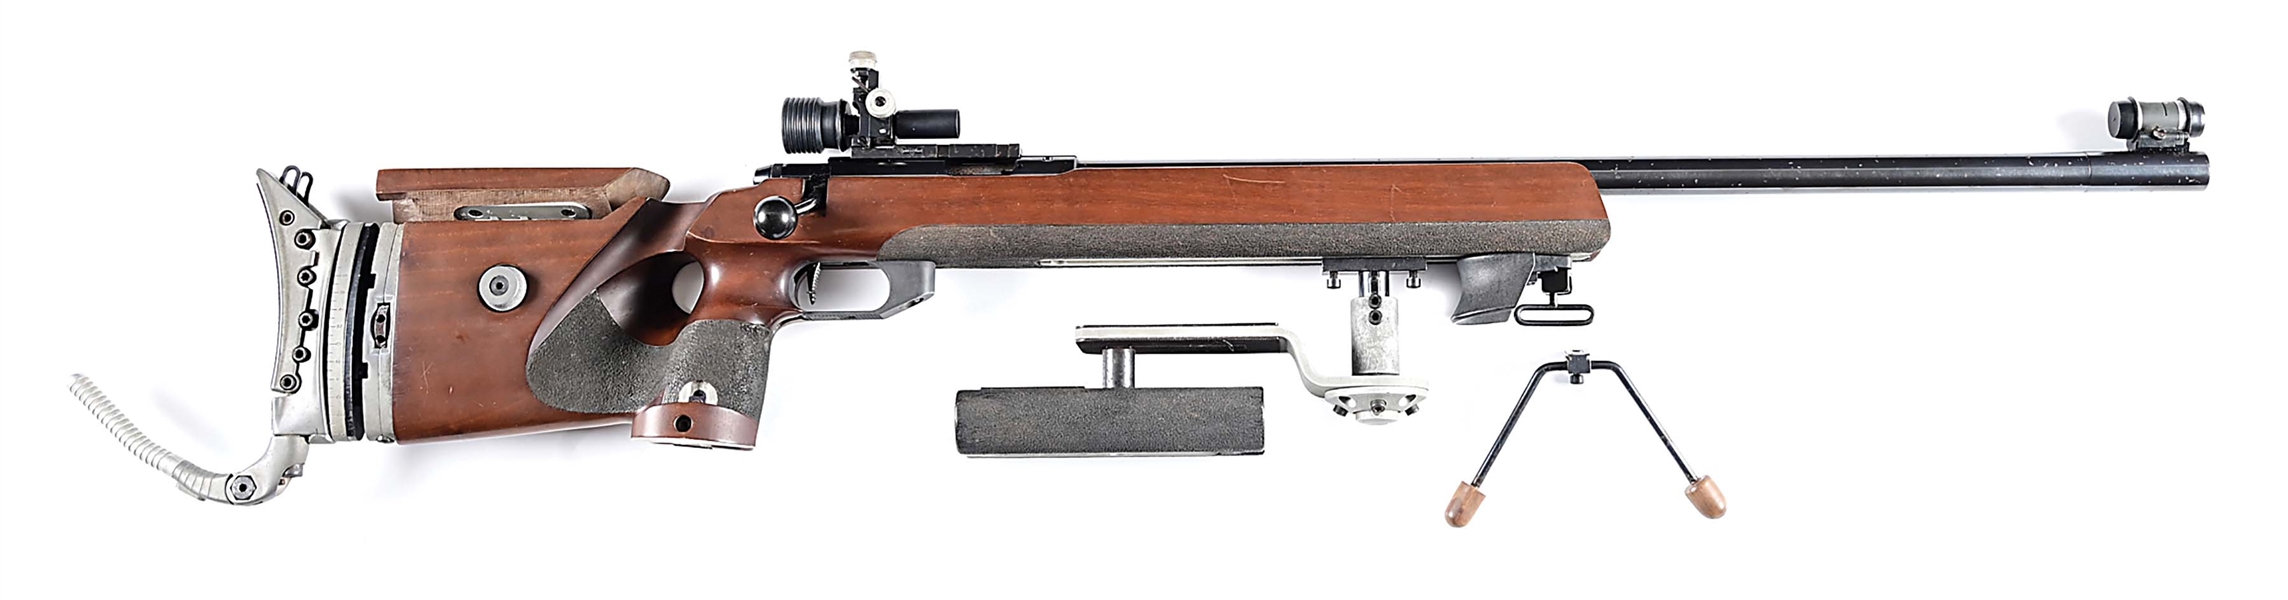 (M) ANSCHUTZ SUPERMATCH MODEL 1813 BOLT ACTION TARGET RIFLE WITH ACCESSORIES.